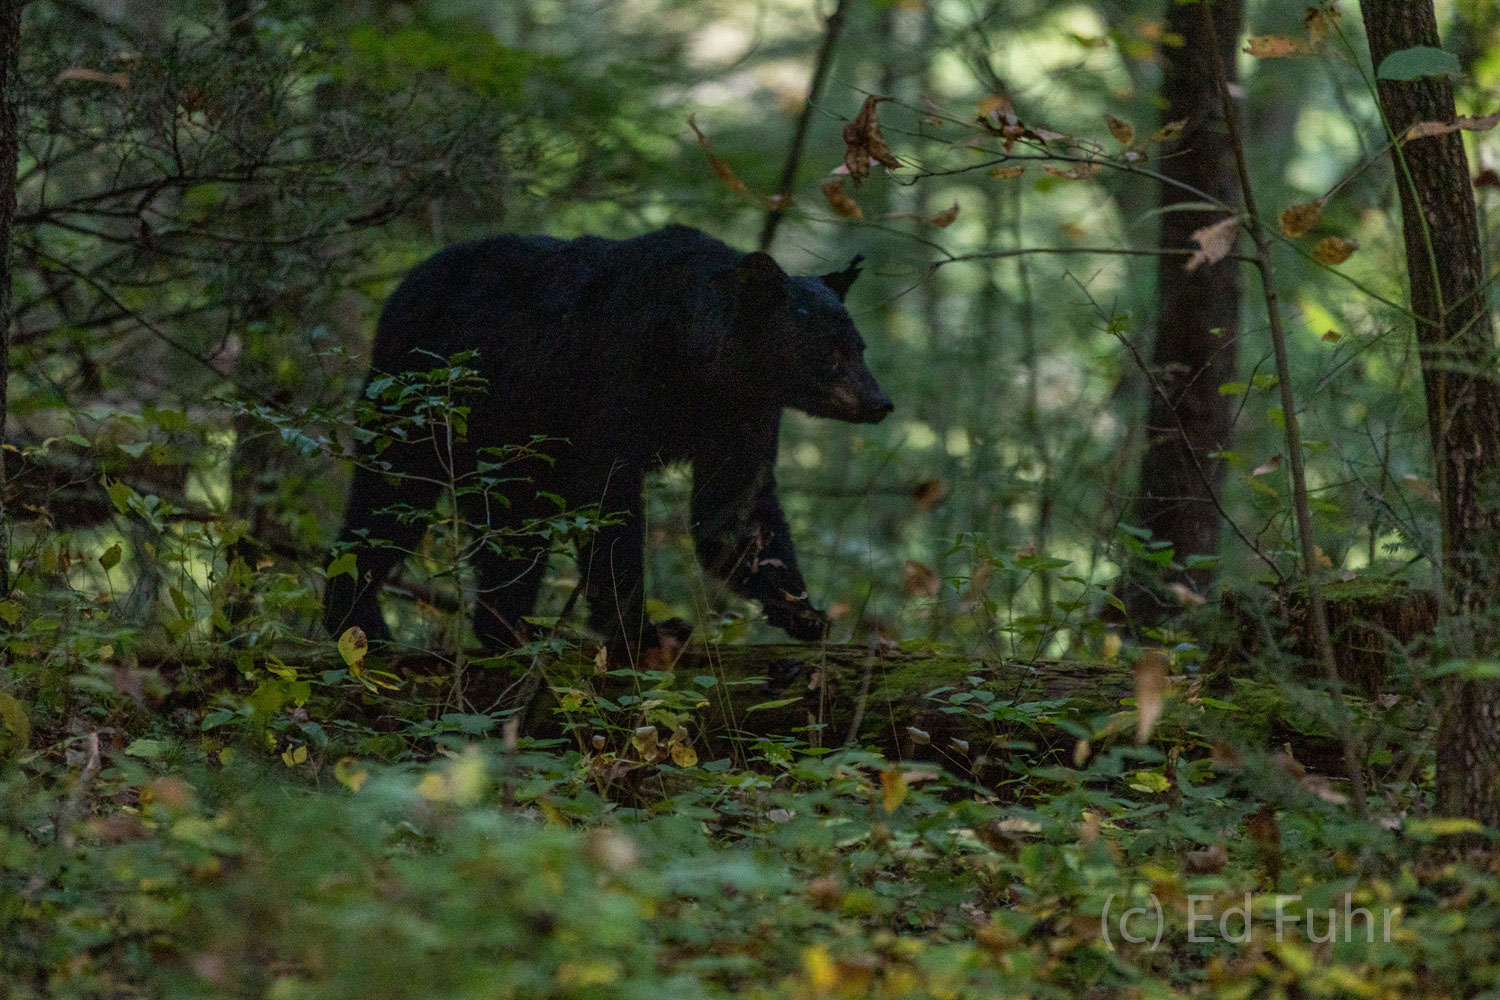 A black bear, always a highlight for Park visitors, often passes unseen in the wood's shadows.